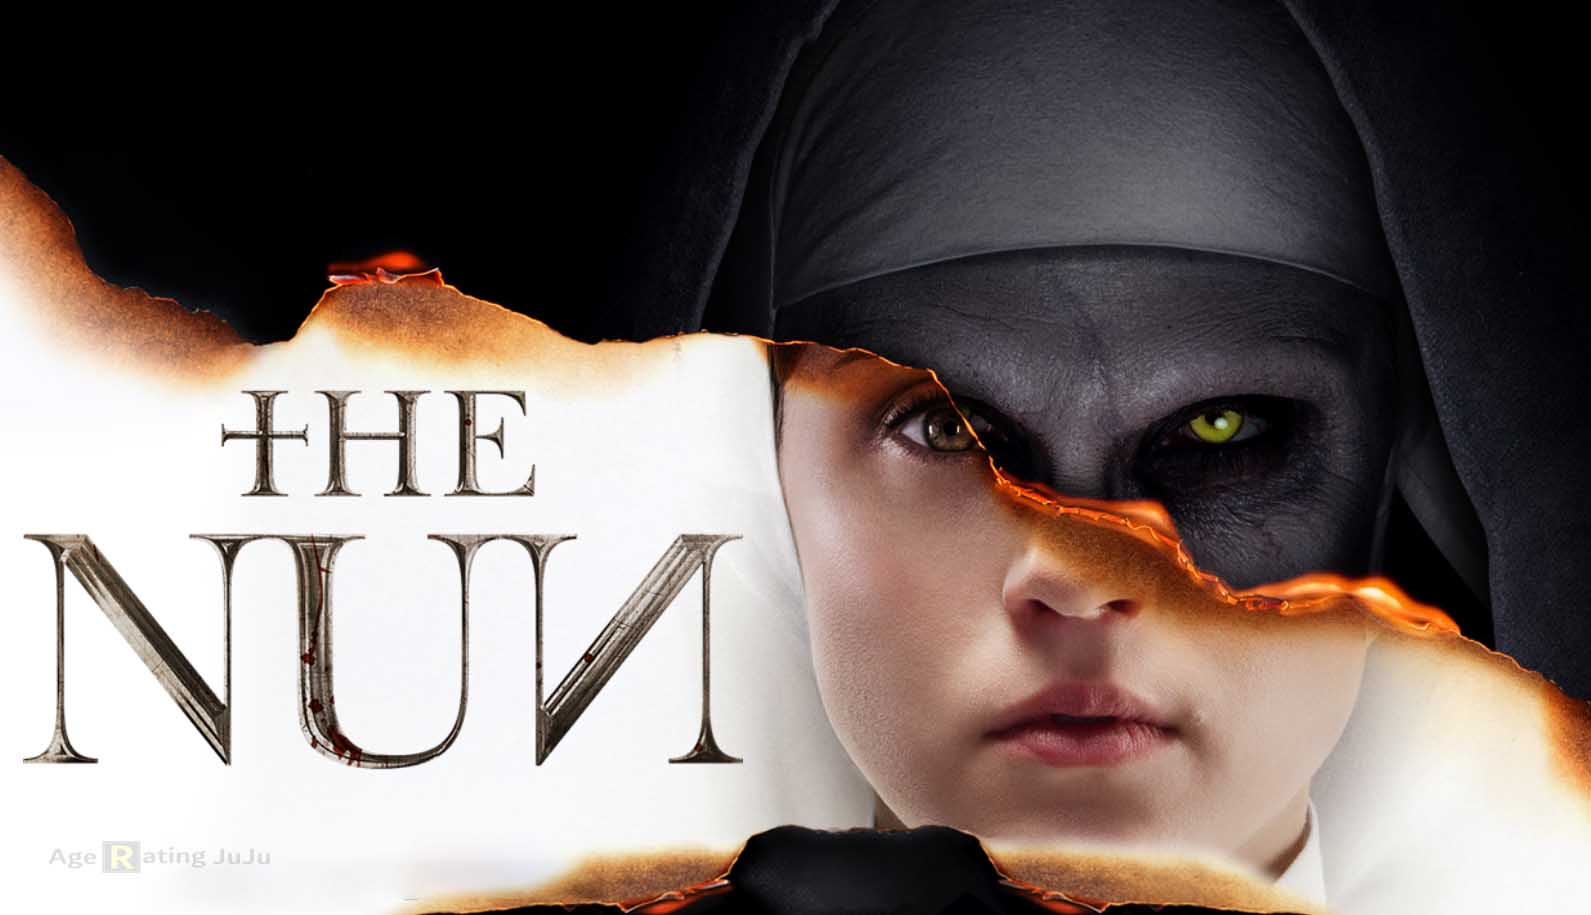 The Nun Age Rating 2018 - Movie Poster Images and Wallpapers